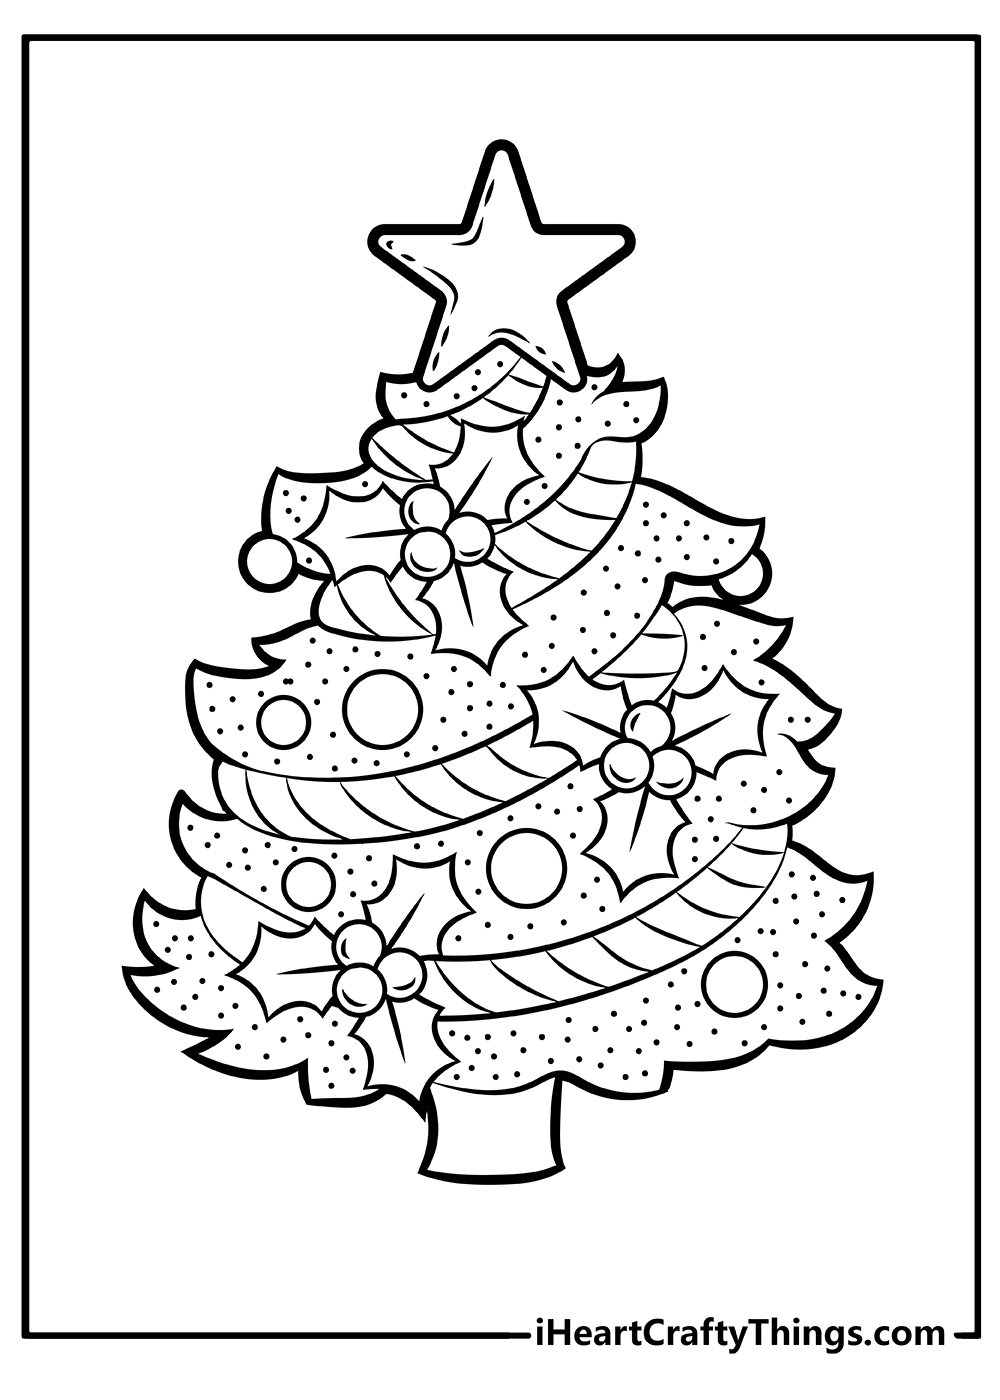 Christmas Tree Coloring Pages free printable